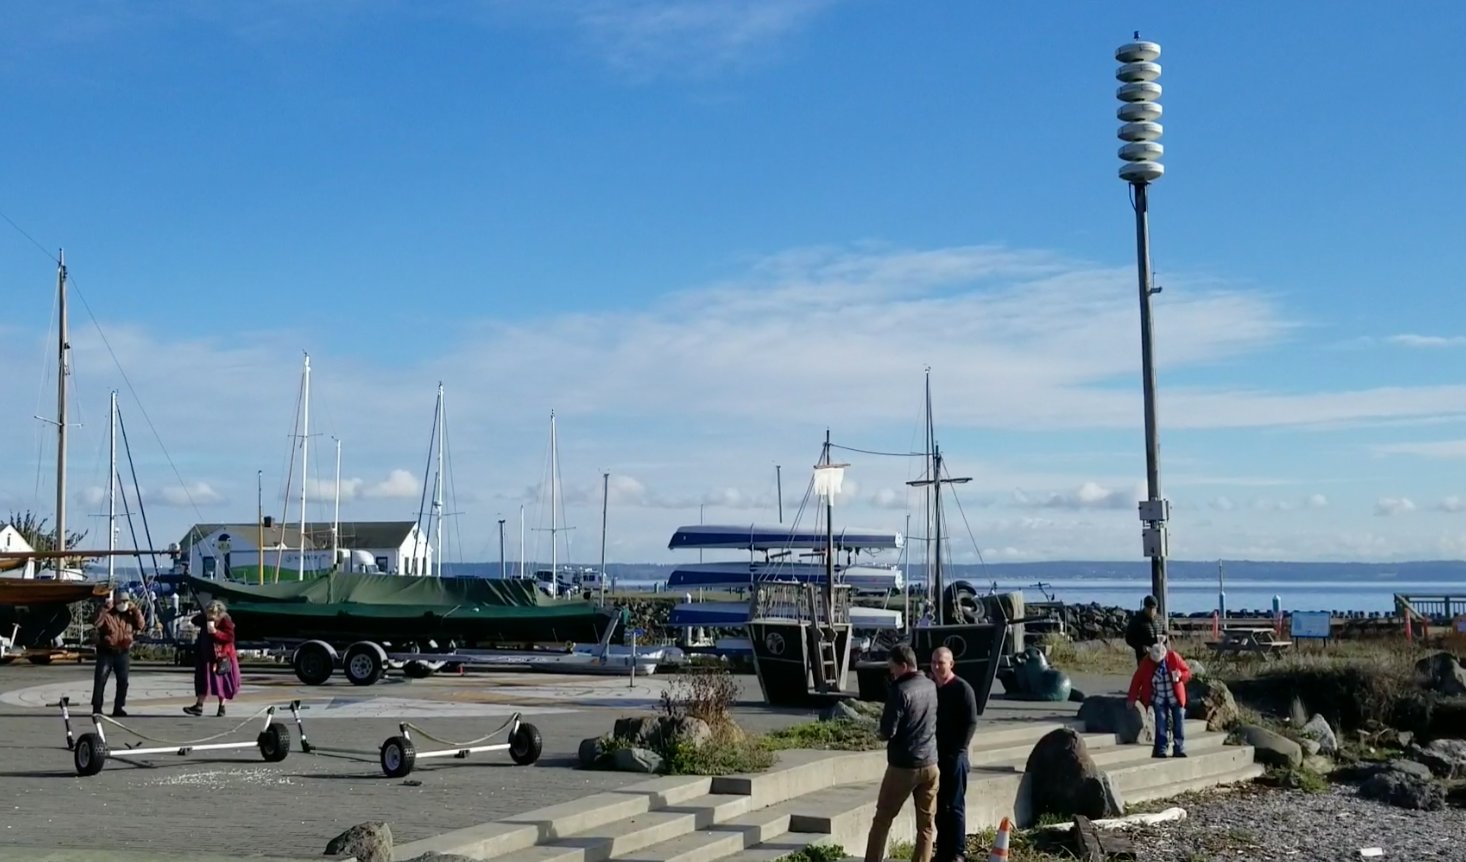 Port Townsend's tsunami sirens sounded on Oct. 15 as part of the "Shakeout" disaster drill.